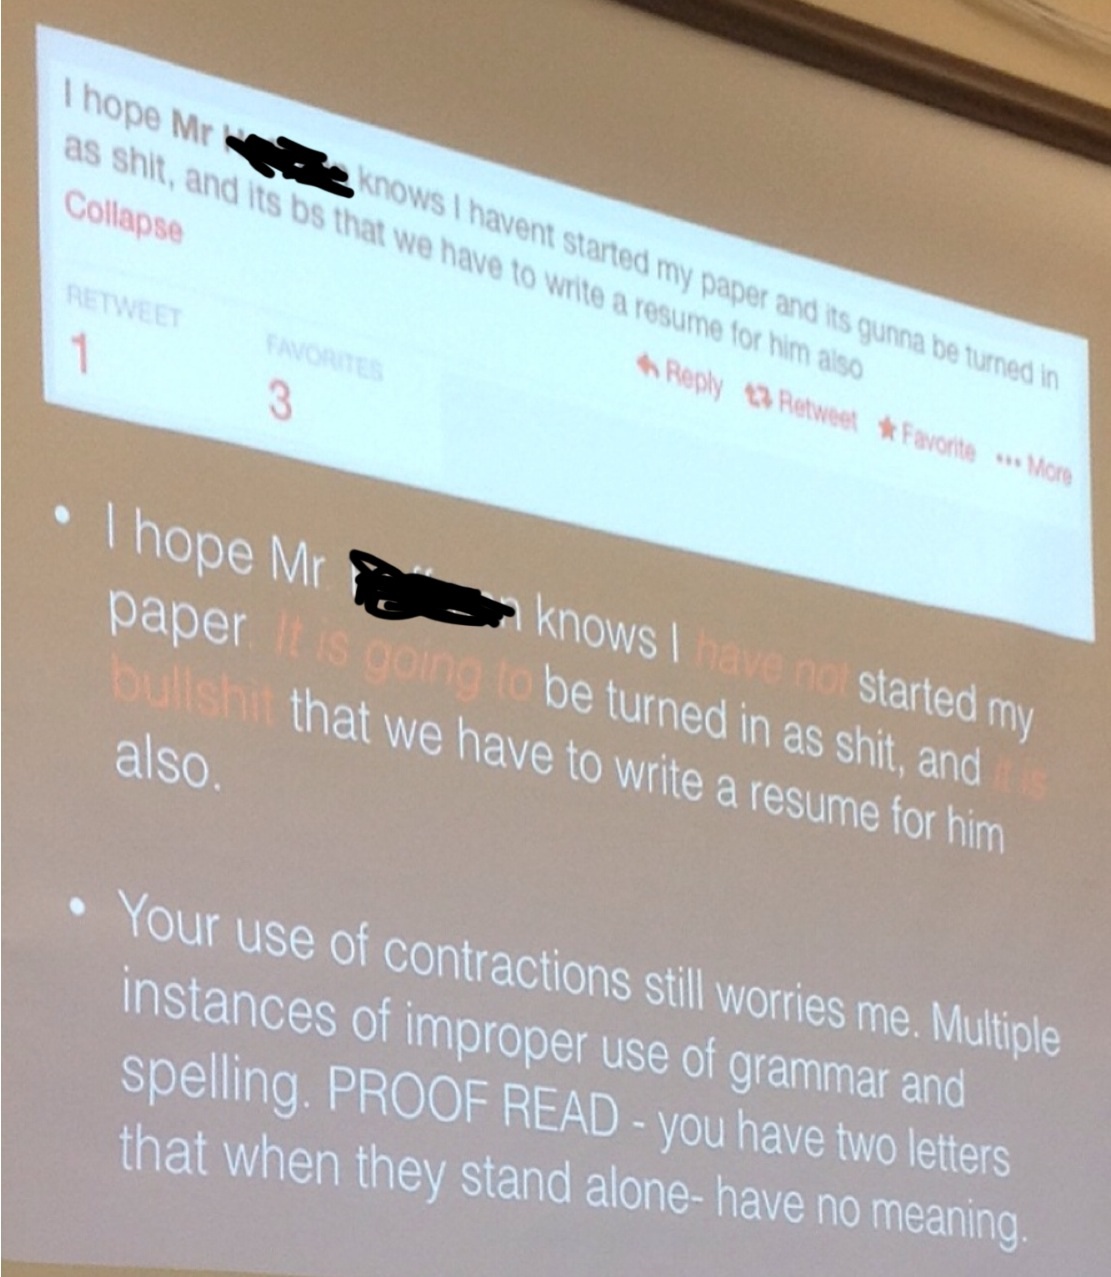 Student complained about an assignment on twitter. The teacher found it.